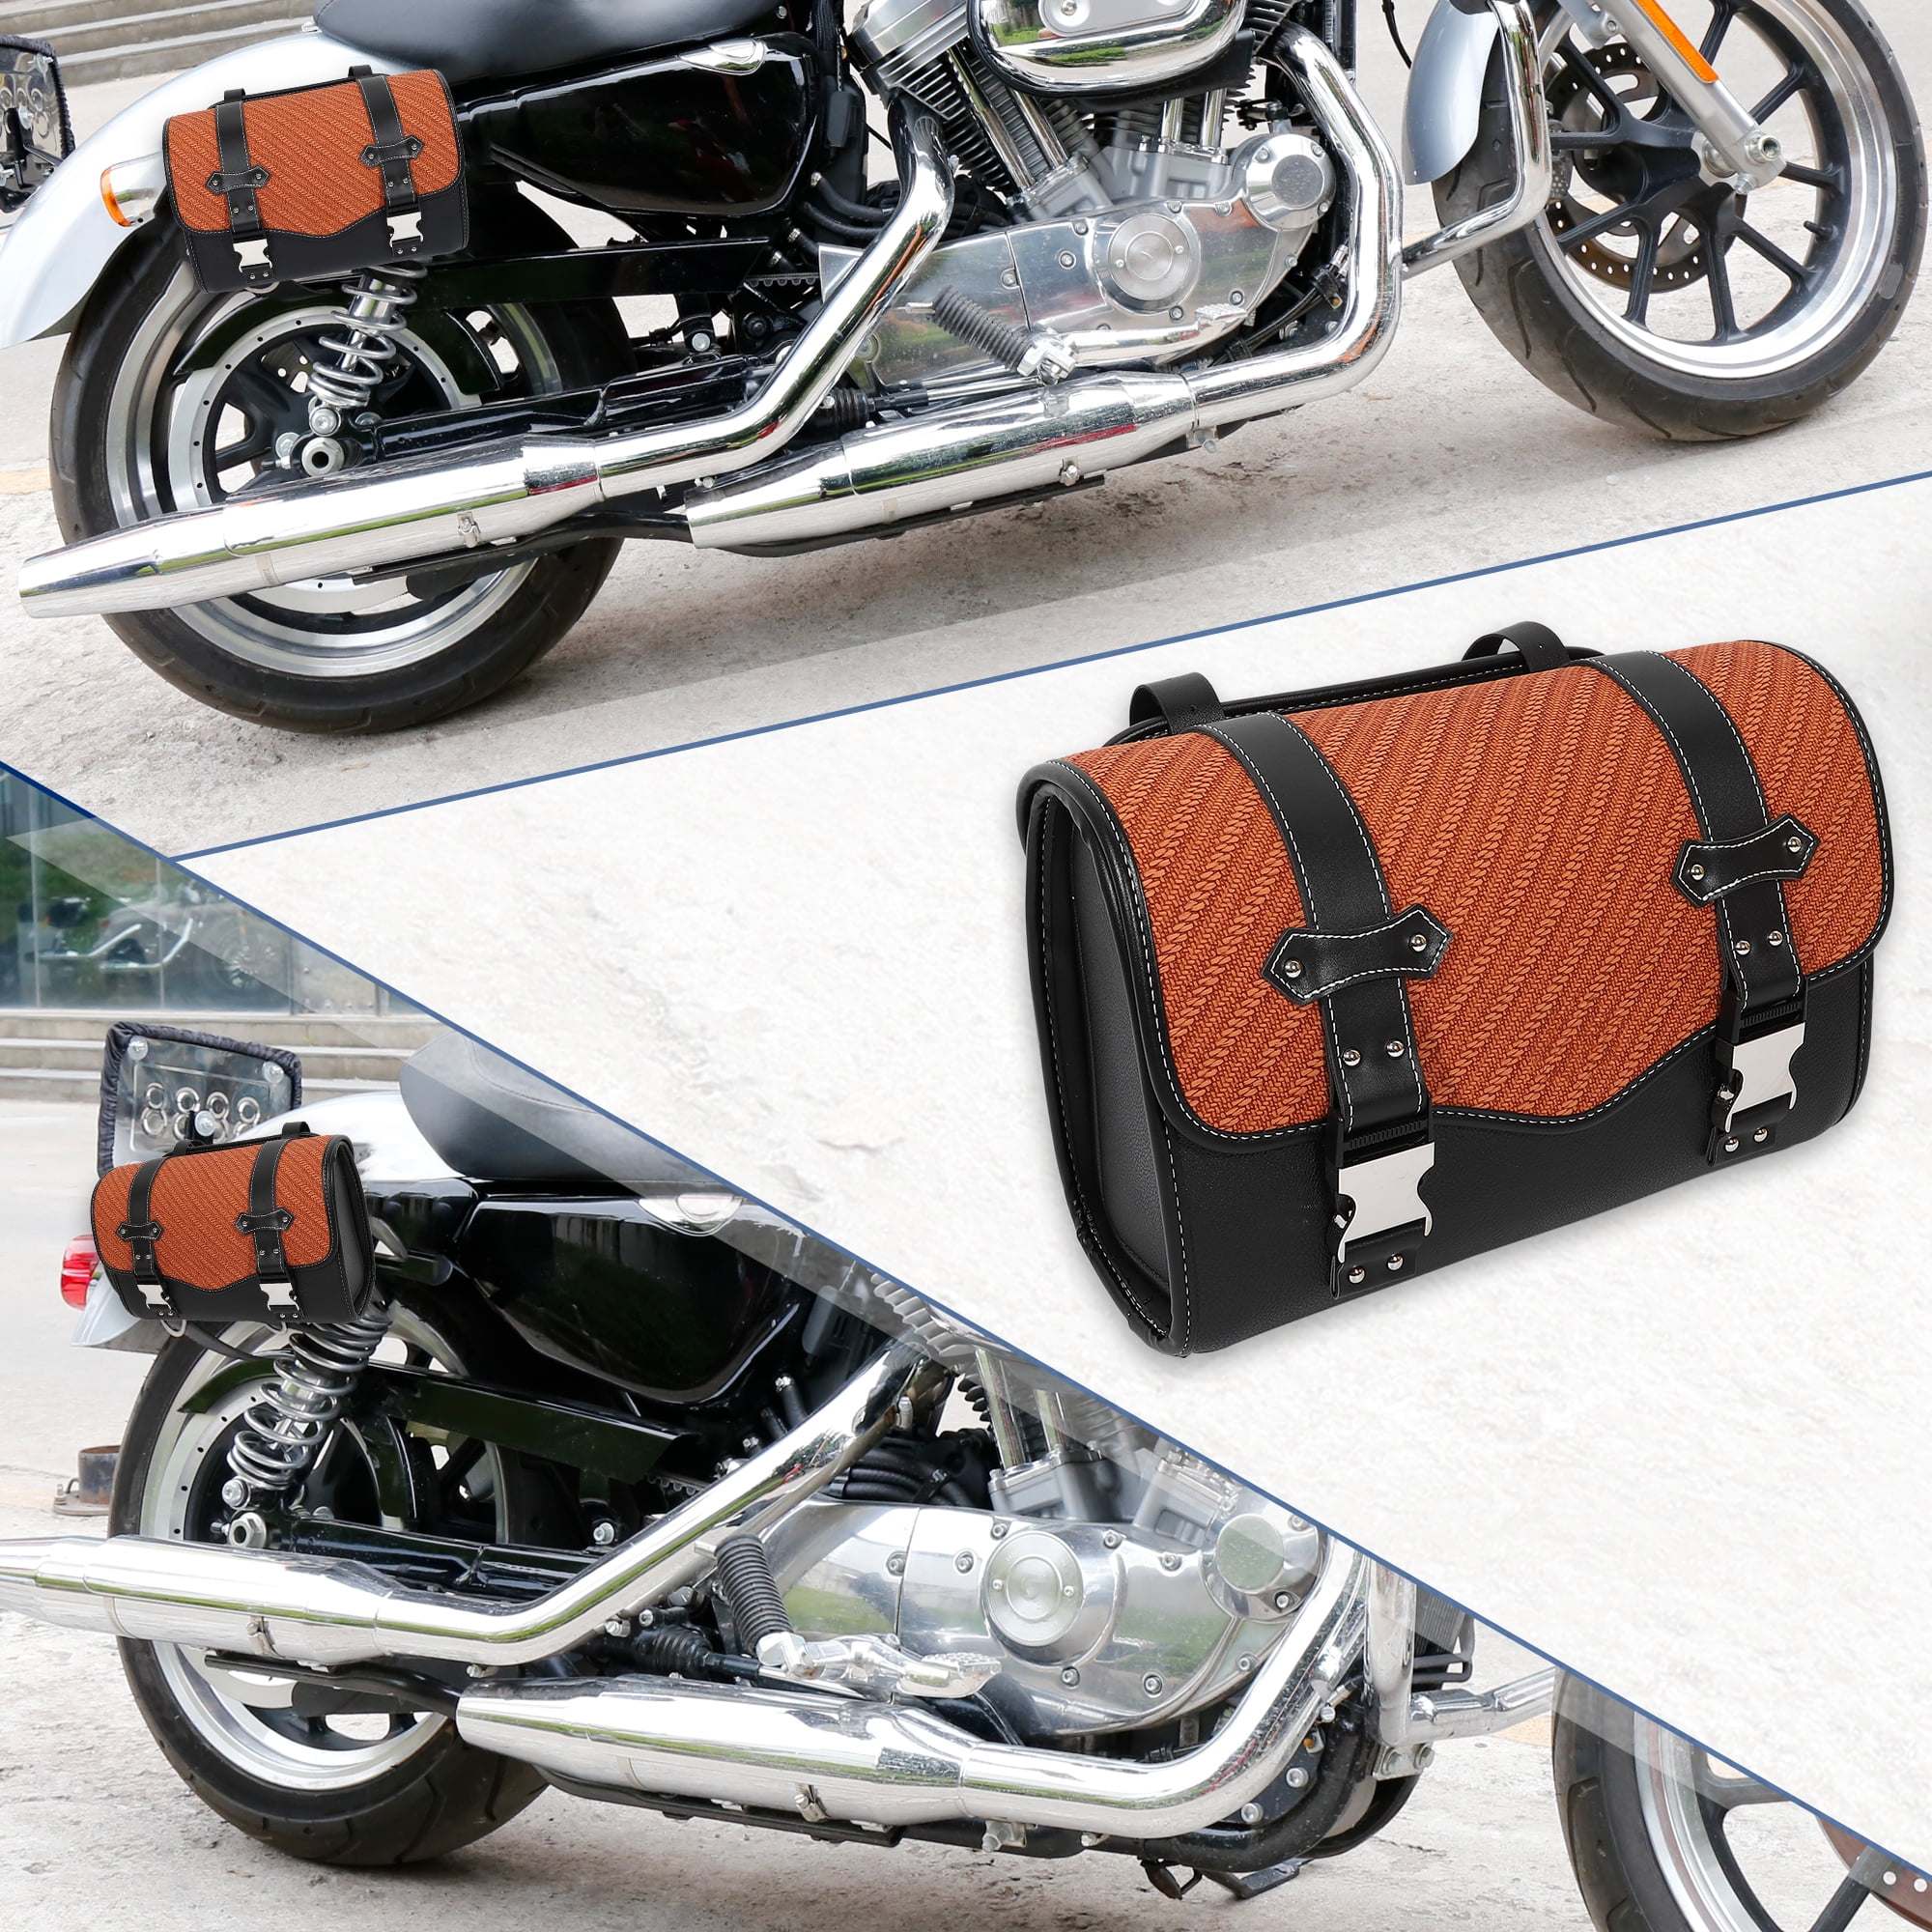 Unique Bargains Handlebar Tool Bag Cycling Barrel Roll Bag for Motorcycle  Faux Leather Black